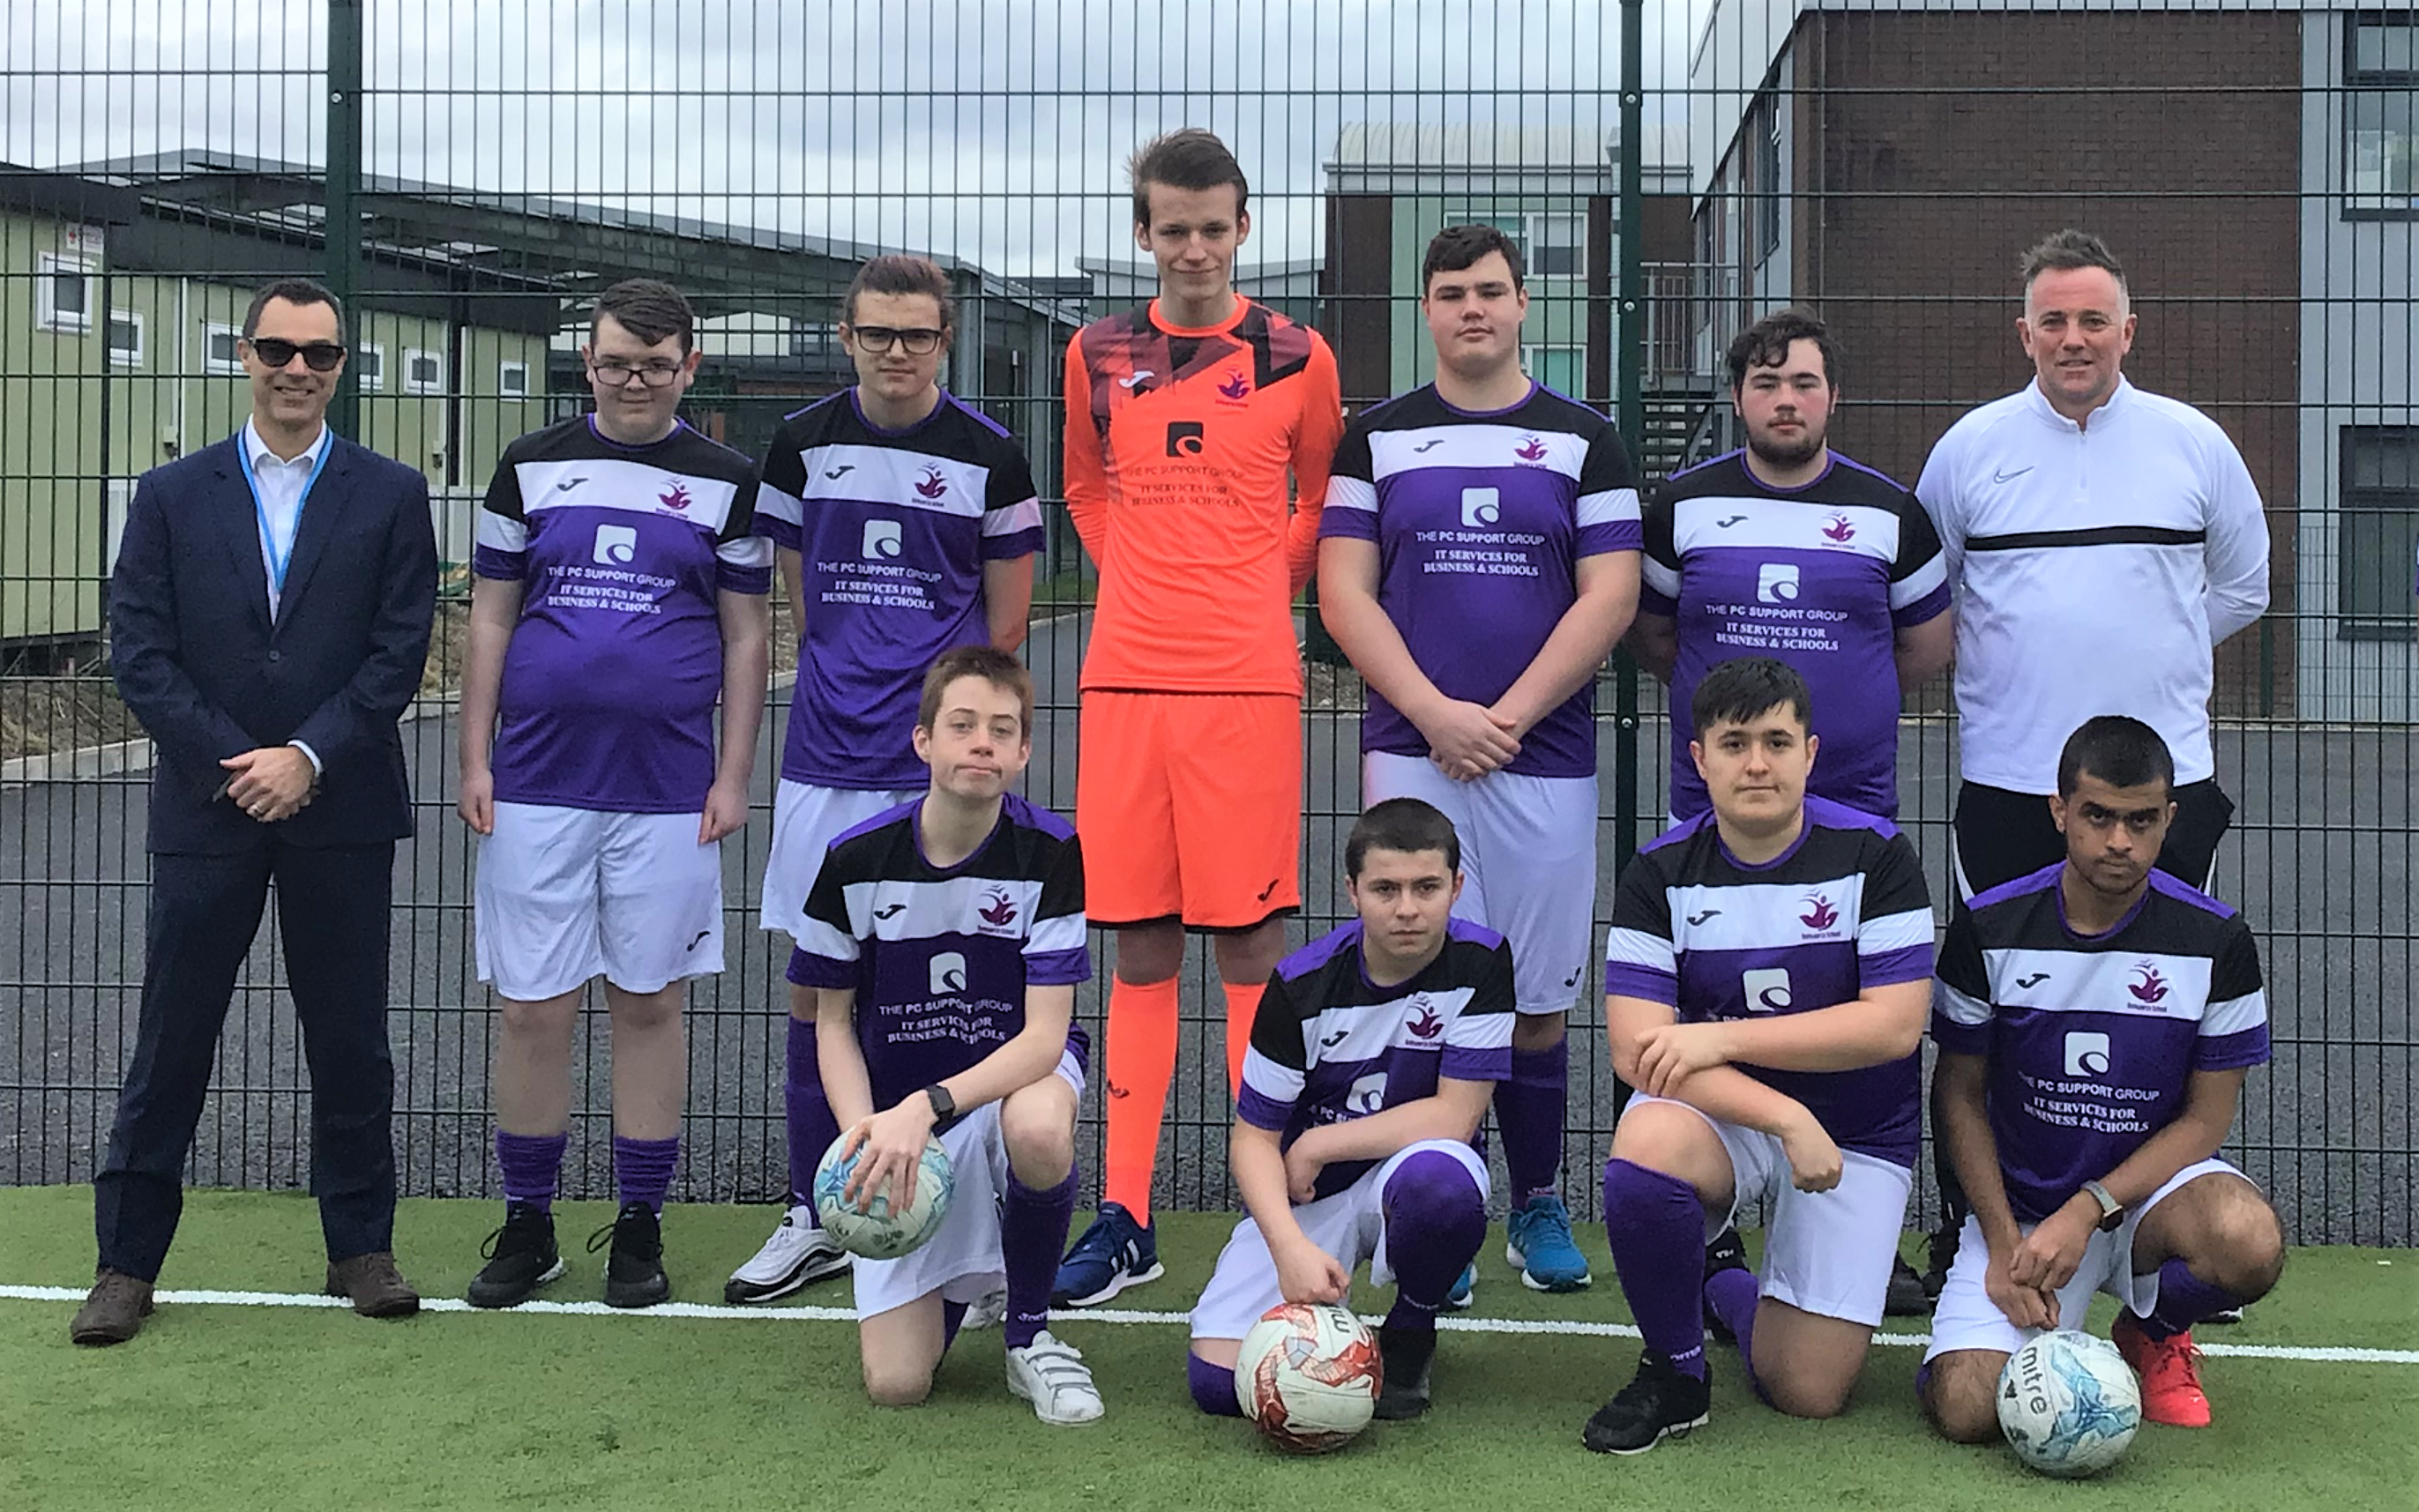 Rumworth School Football team in their new 2022 kit donated by The PC Support Group